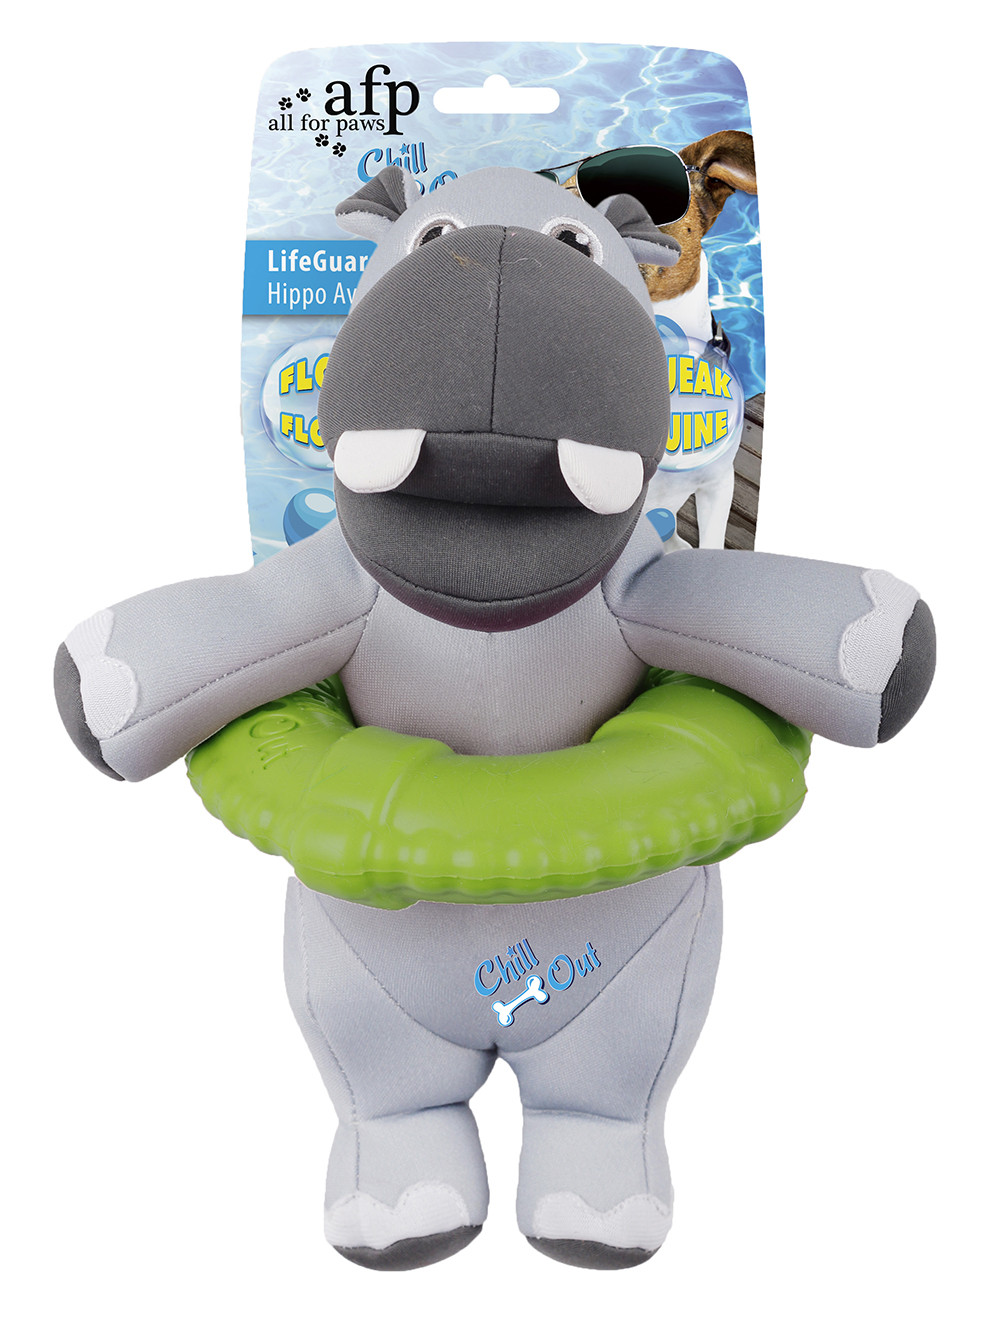 All for Paws Chill Out LifeGuard Hippo